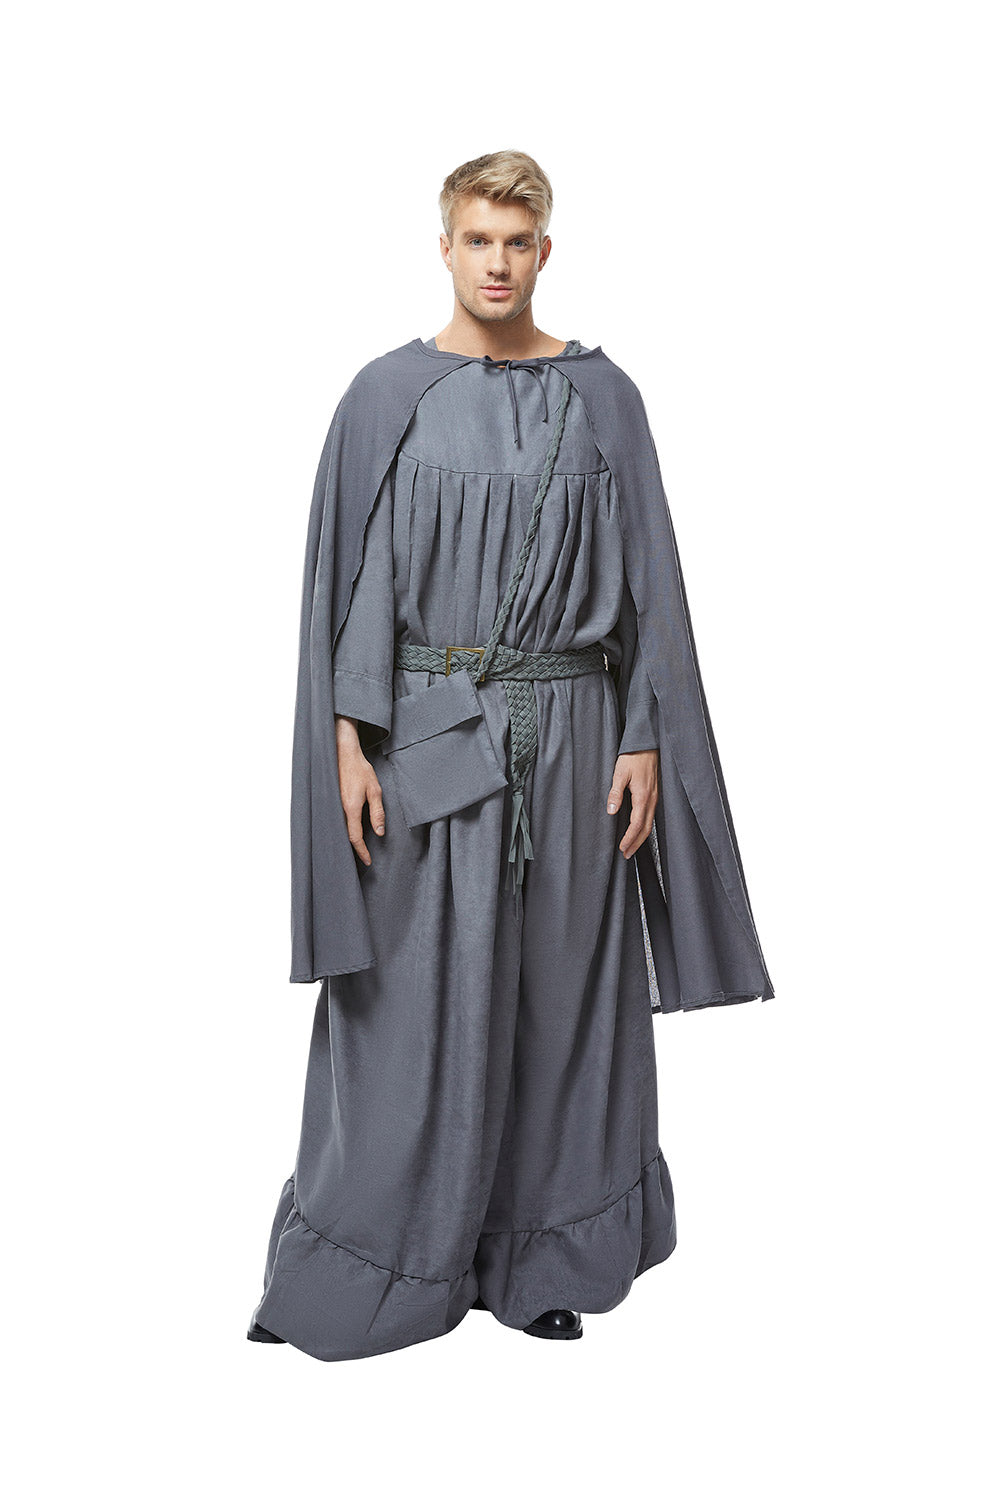 Film The Lord of the Rings Homme Manteau Gris Halloween Carnaval